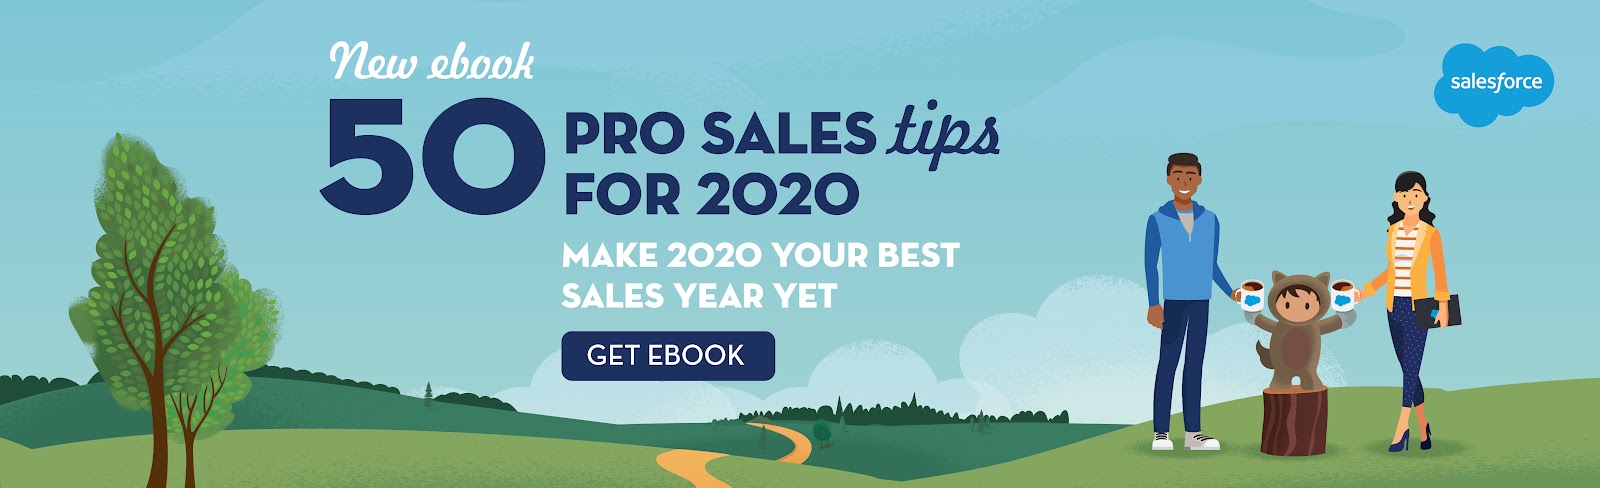 50 Pro Sales Tips ebook and make 2020 your best sales year